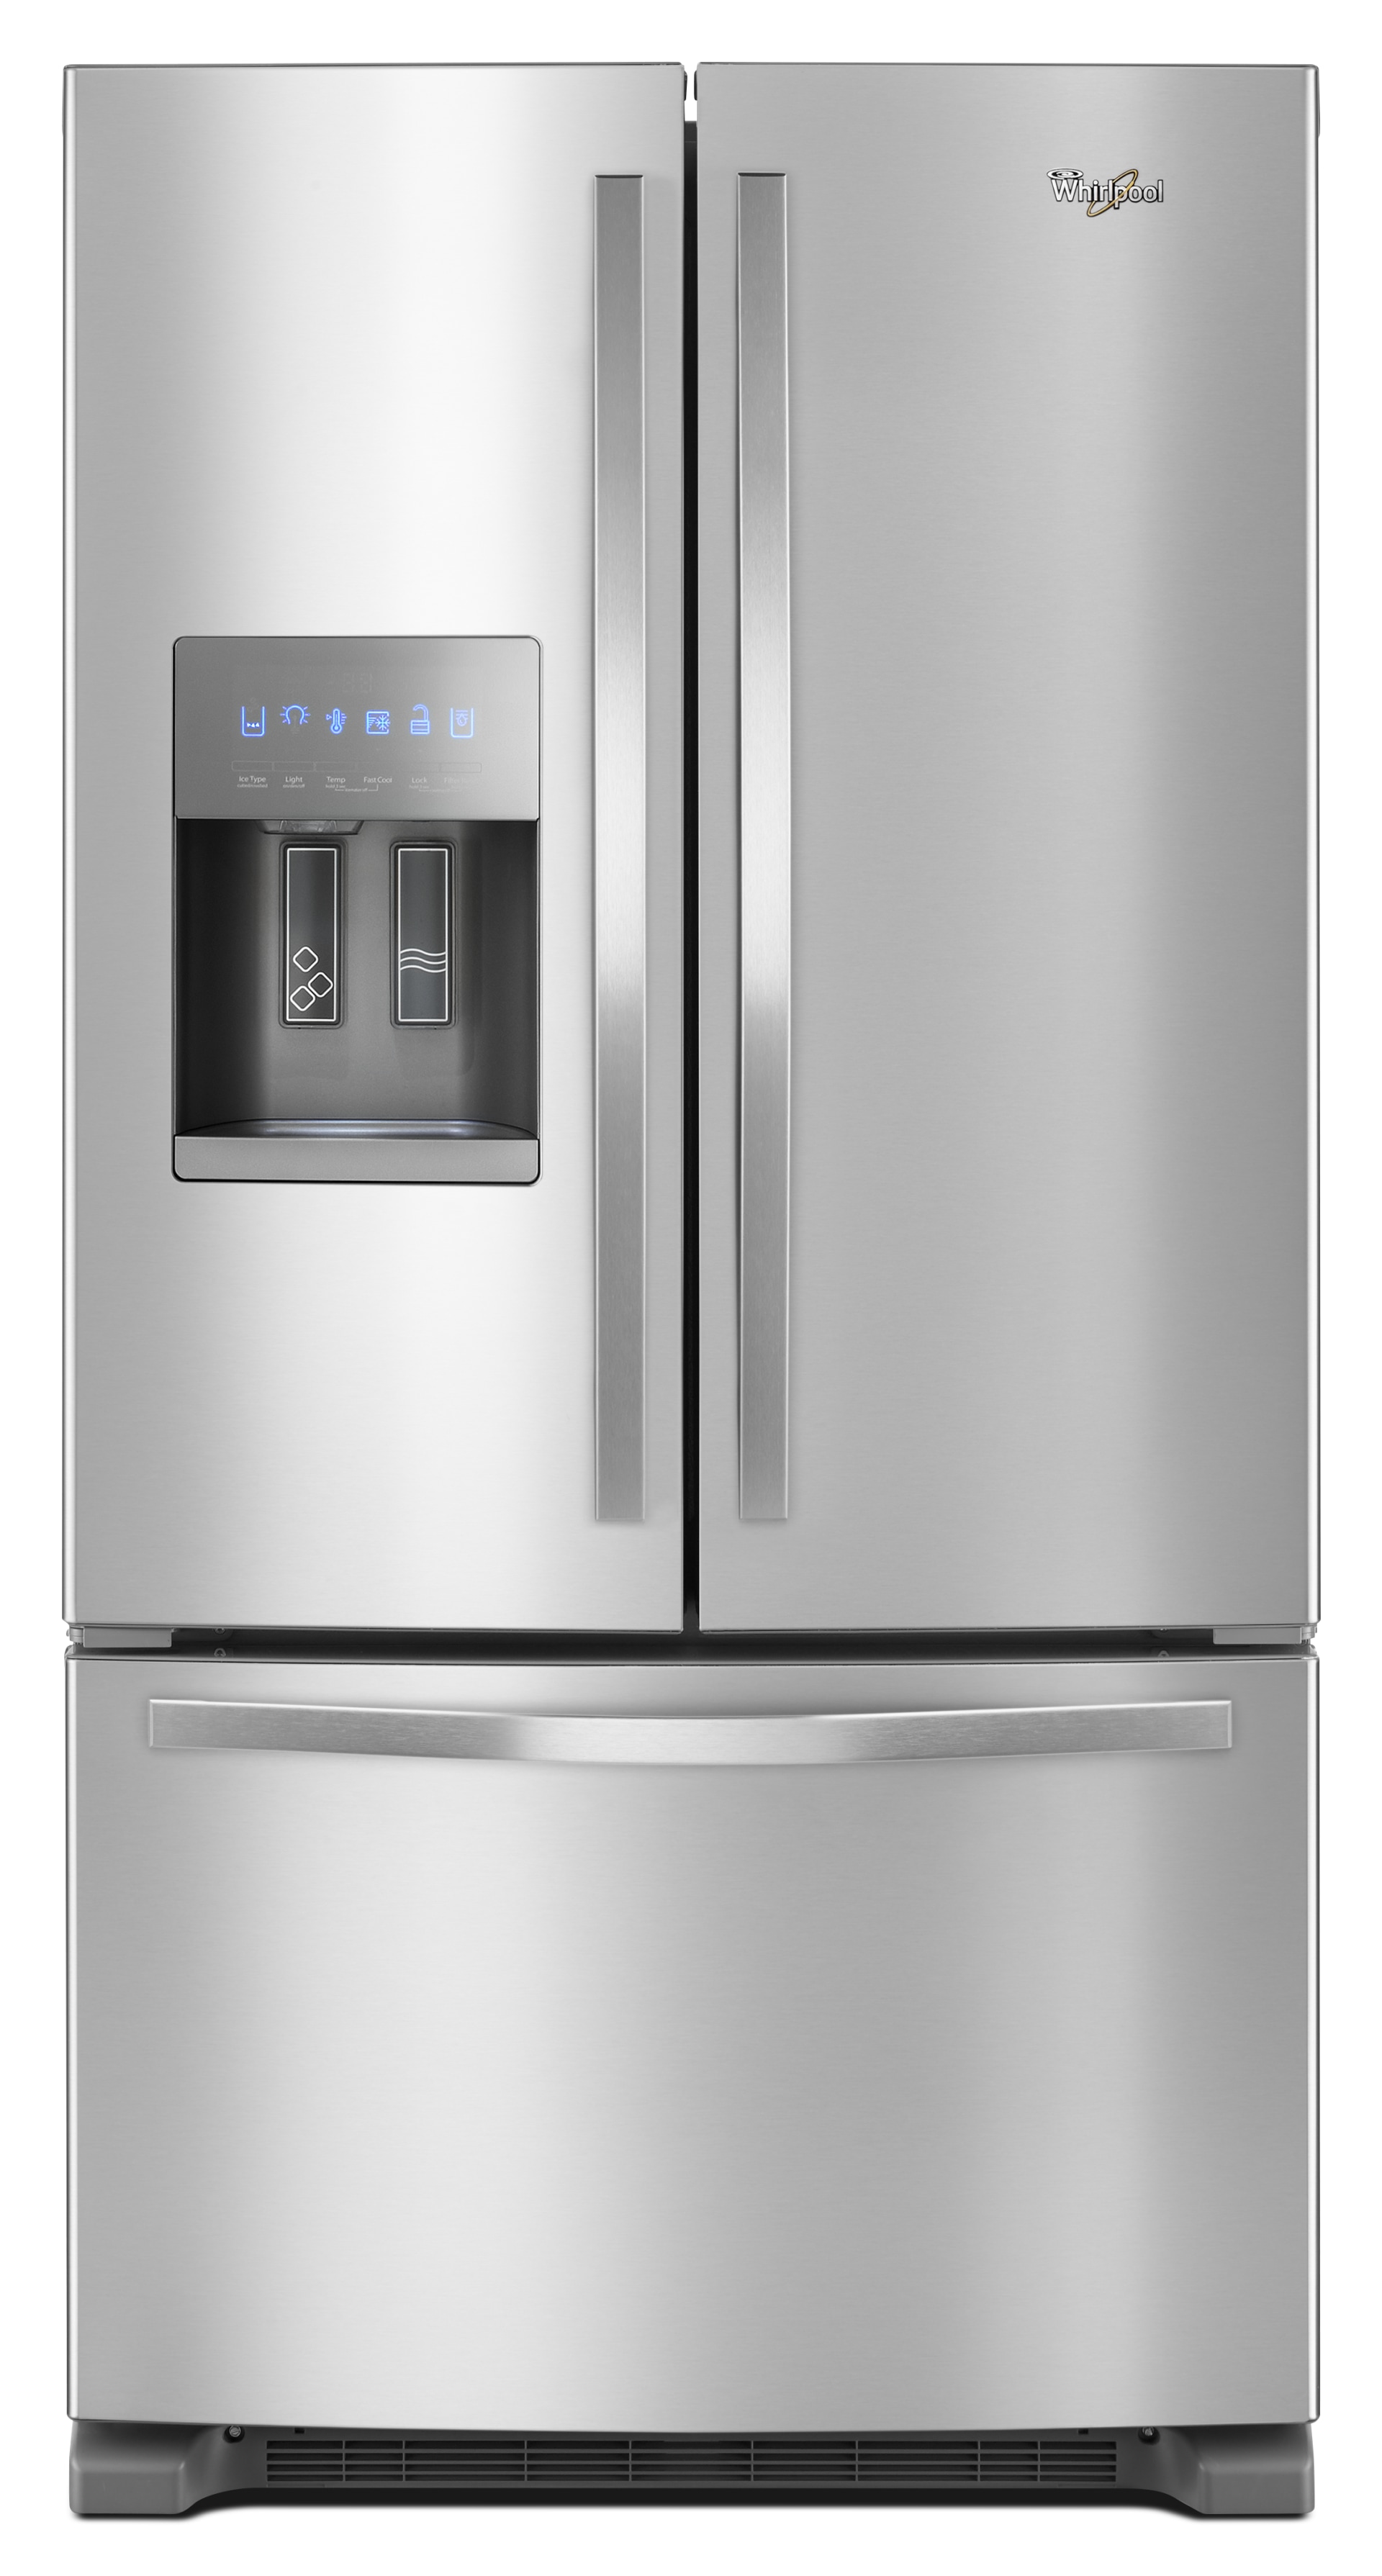 Whirlpool 25 Cu Ft French Door Refrigerator Fingerprint Resistant Stainless Steel Wrf555sdfz Grand Appliance And Tv